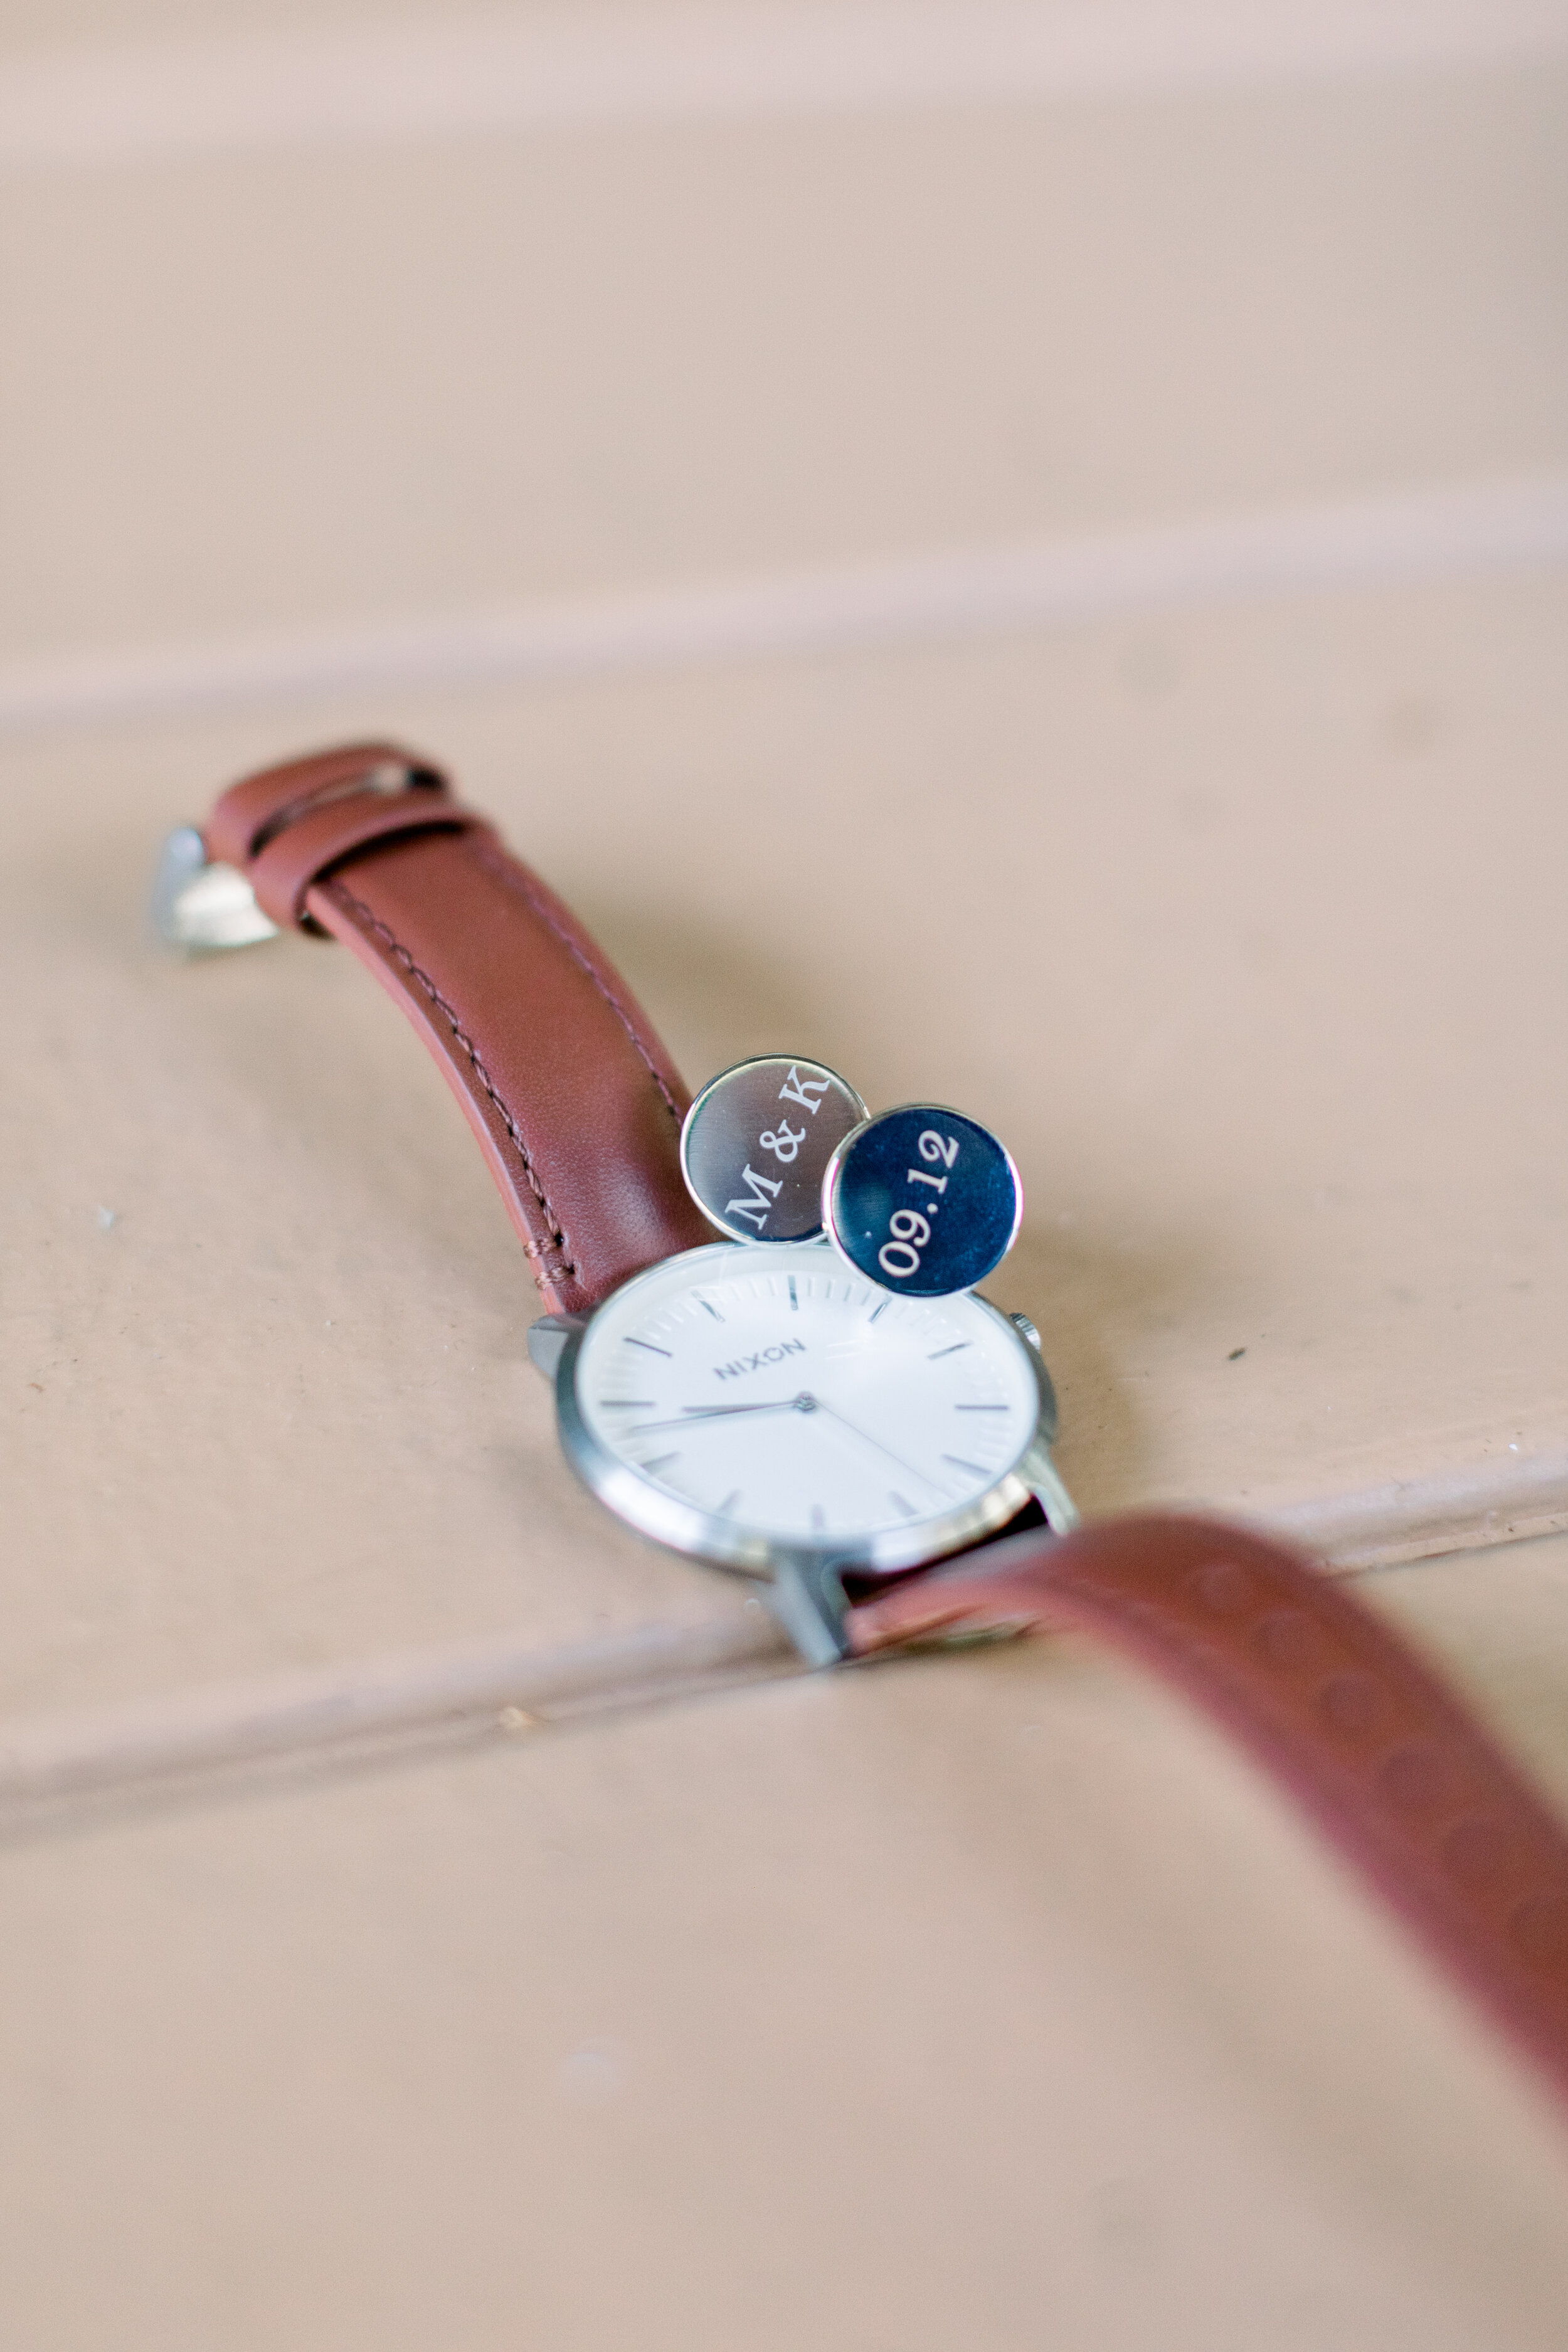  Looking for unique accessories for the groom? Check out this watch and cuff links with the wedding date engraved. Close up on wedding accessories for the groom groom aesthetic inspiration ideas and goals mementoes for the groom and groomsmen wedding